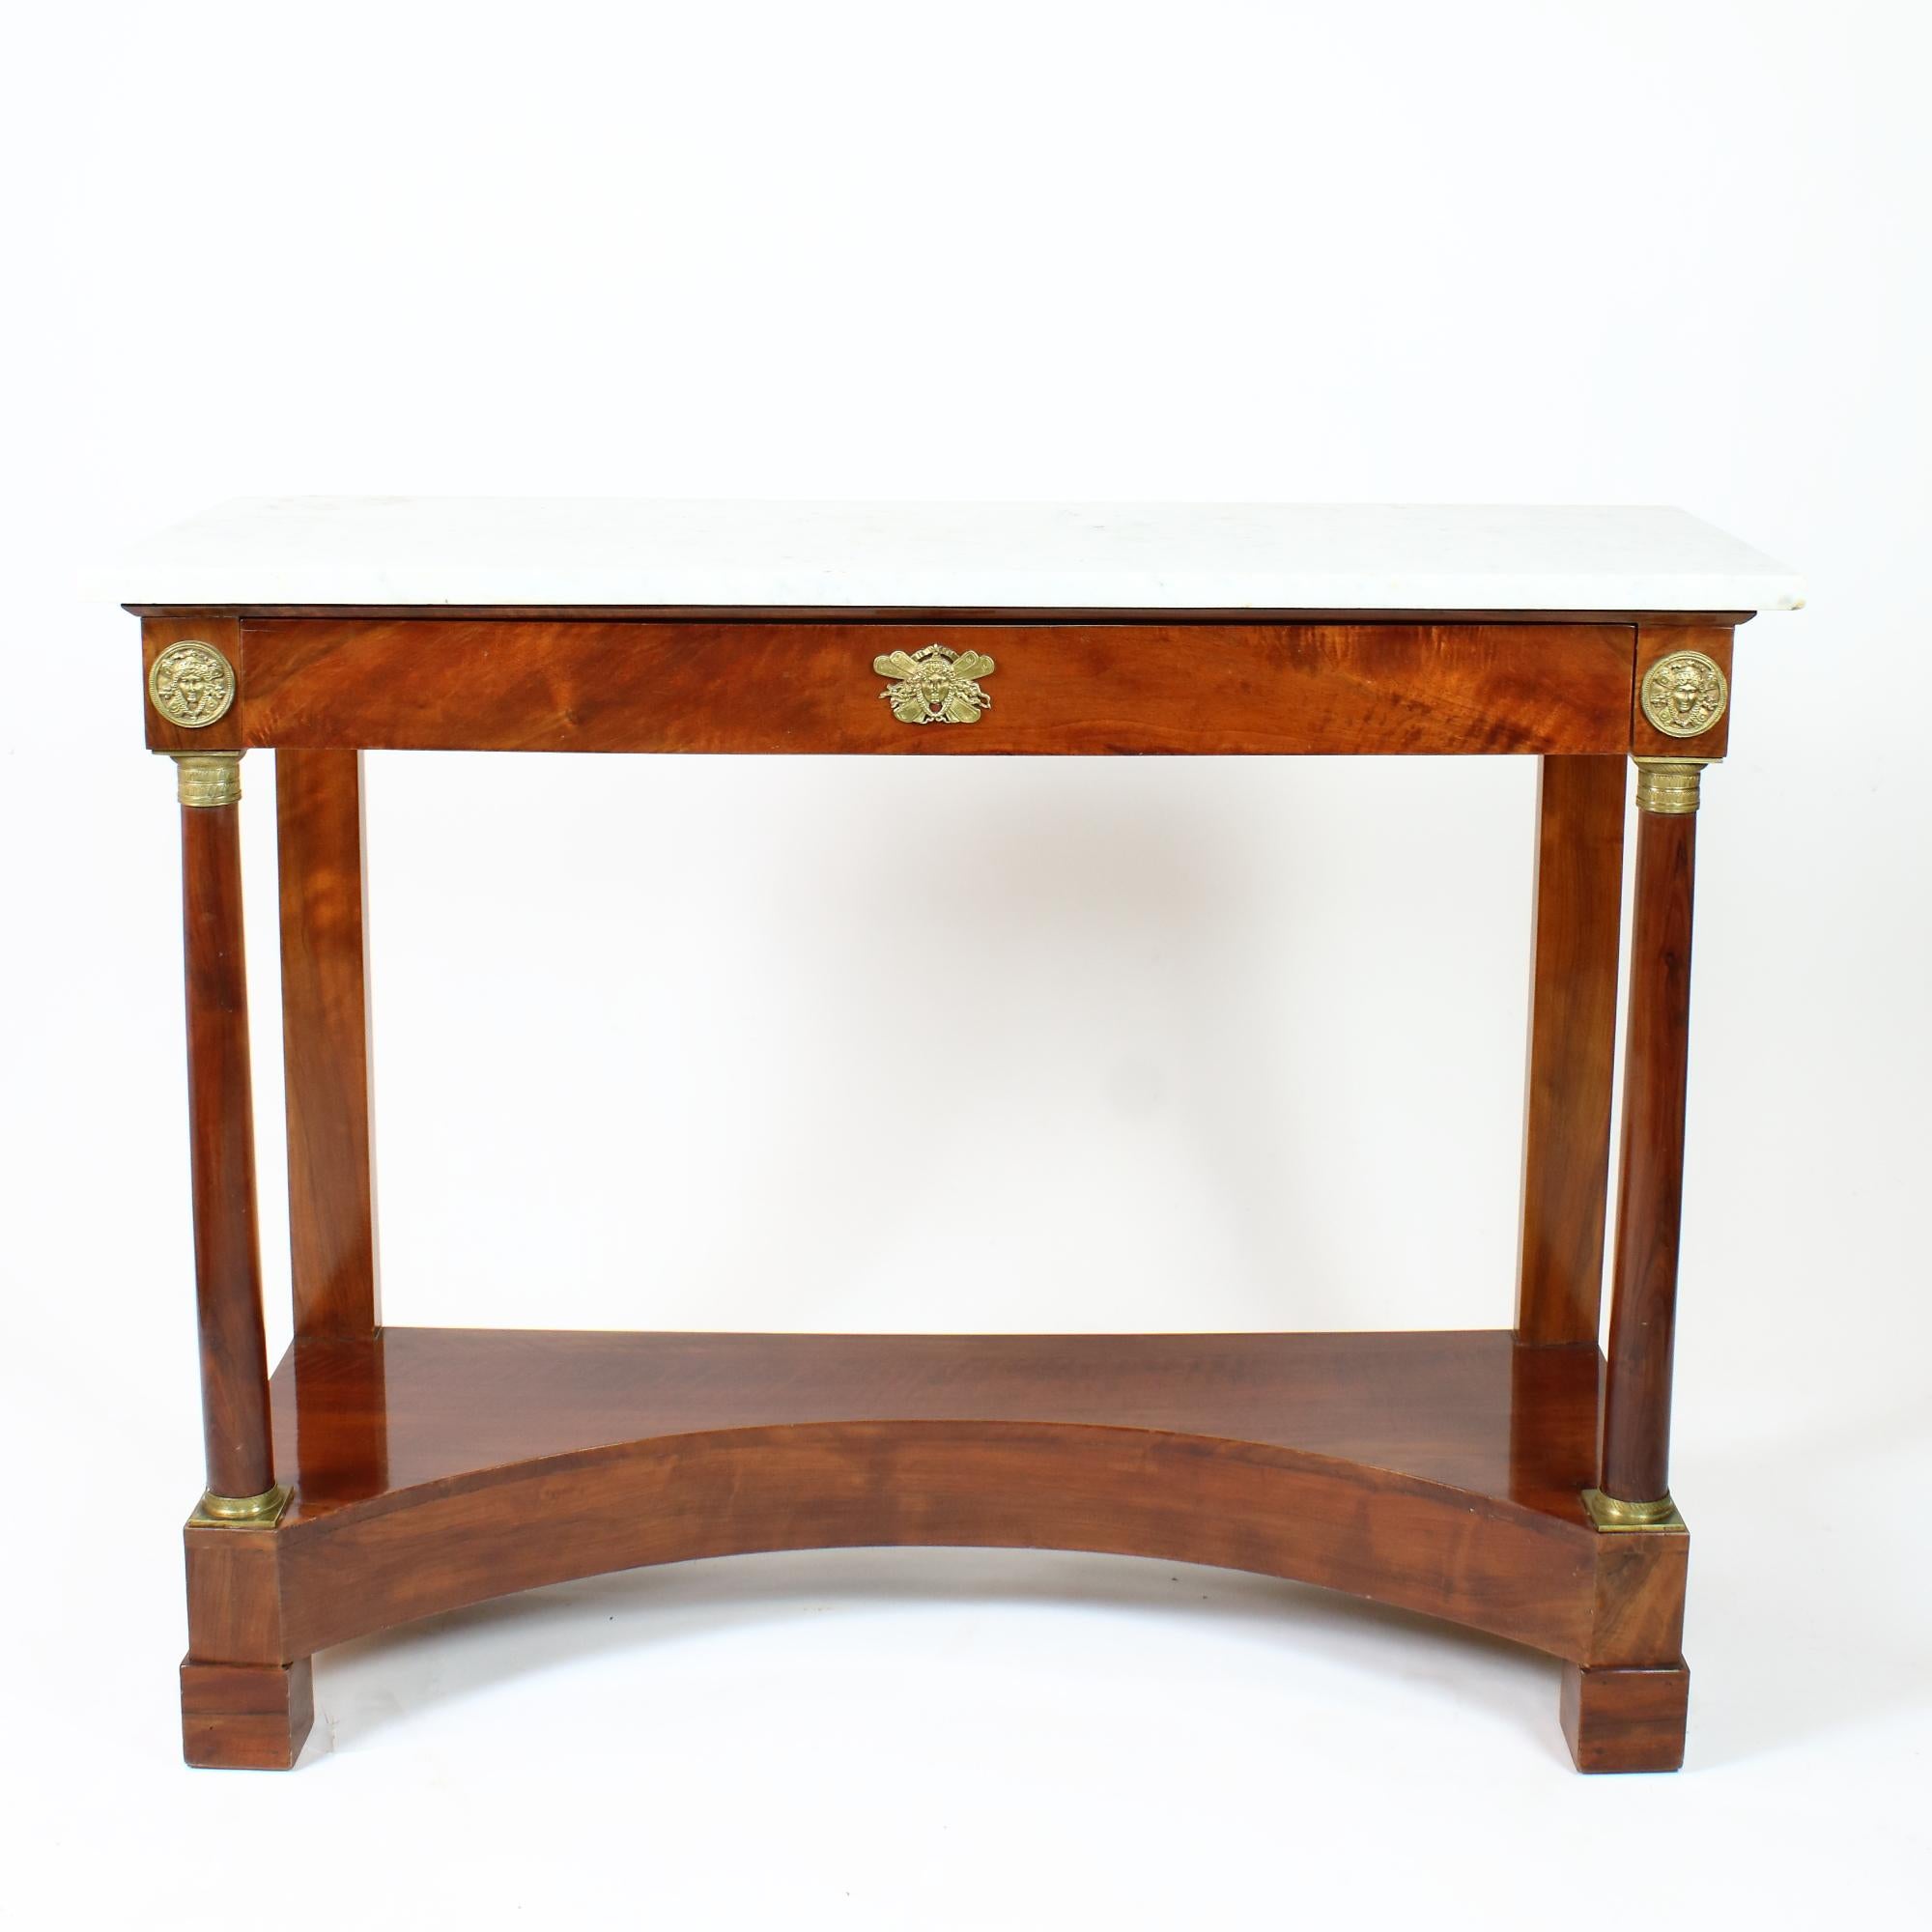 Early 19th century French Empire Large Neoclassical Walnut Console Table

An elegant Empire period console table with a with marble top above a frieze drawer, the frieze section is raised on columnar front legs and pilasters at the back, all